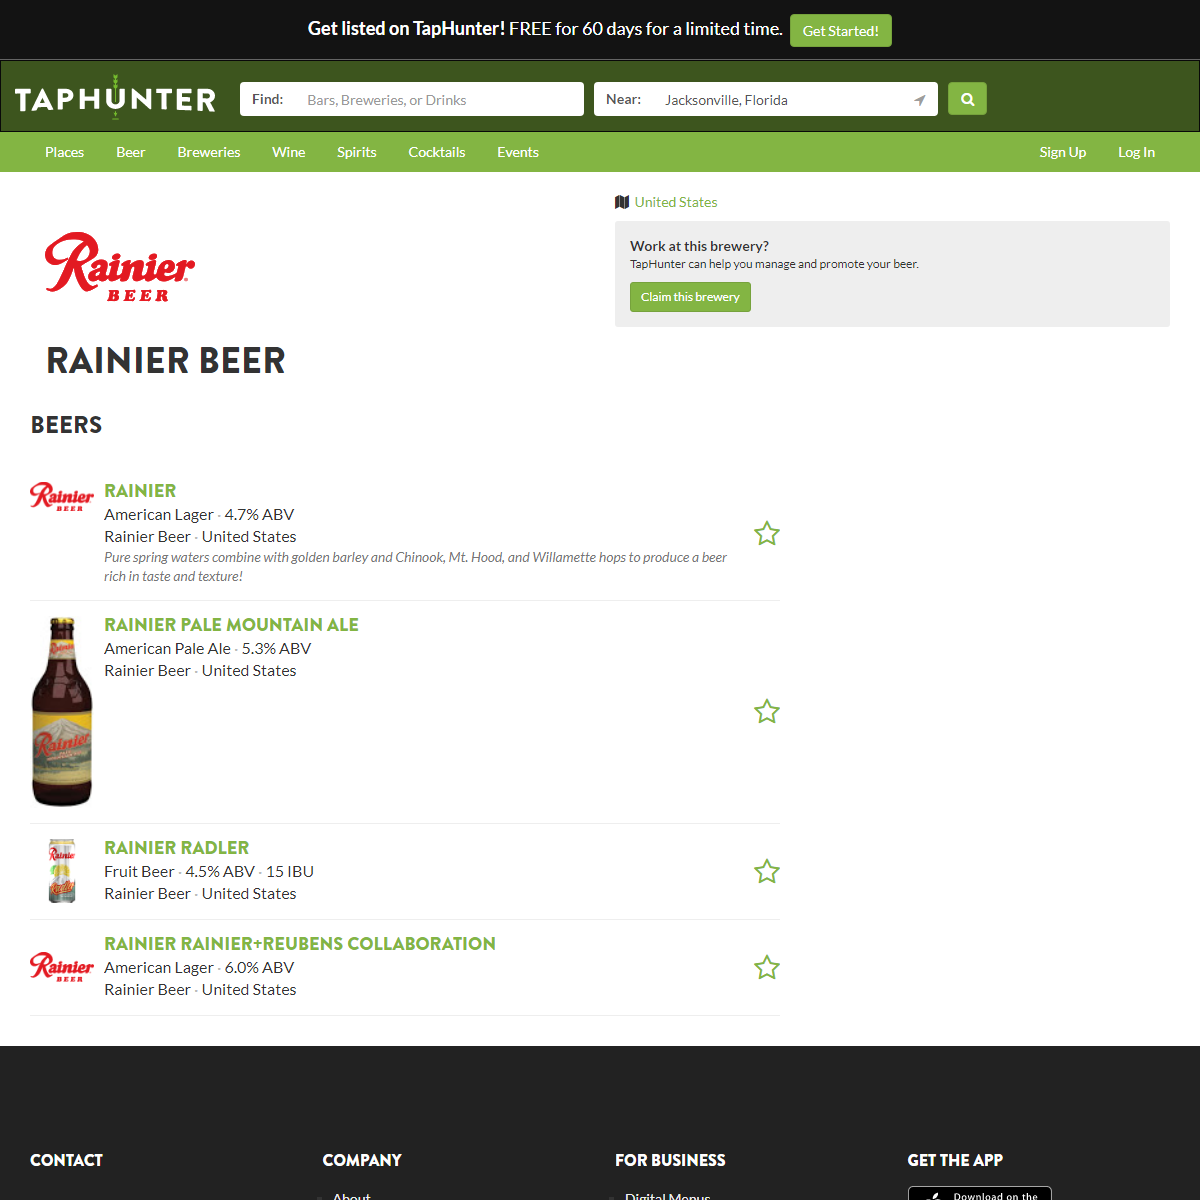 A complete backup of https://www.taphunter.com/brewery/rainier-beer/49031064